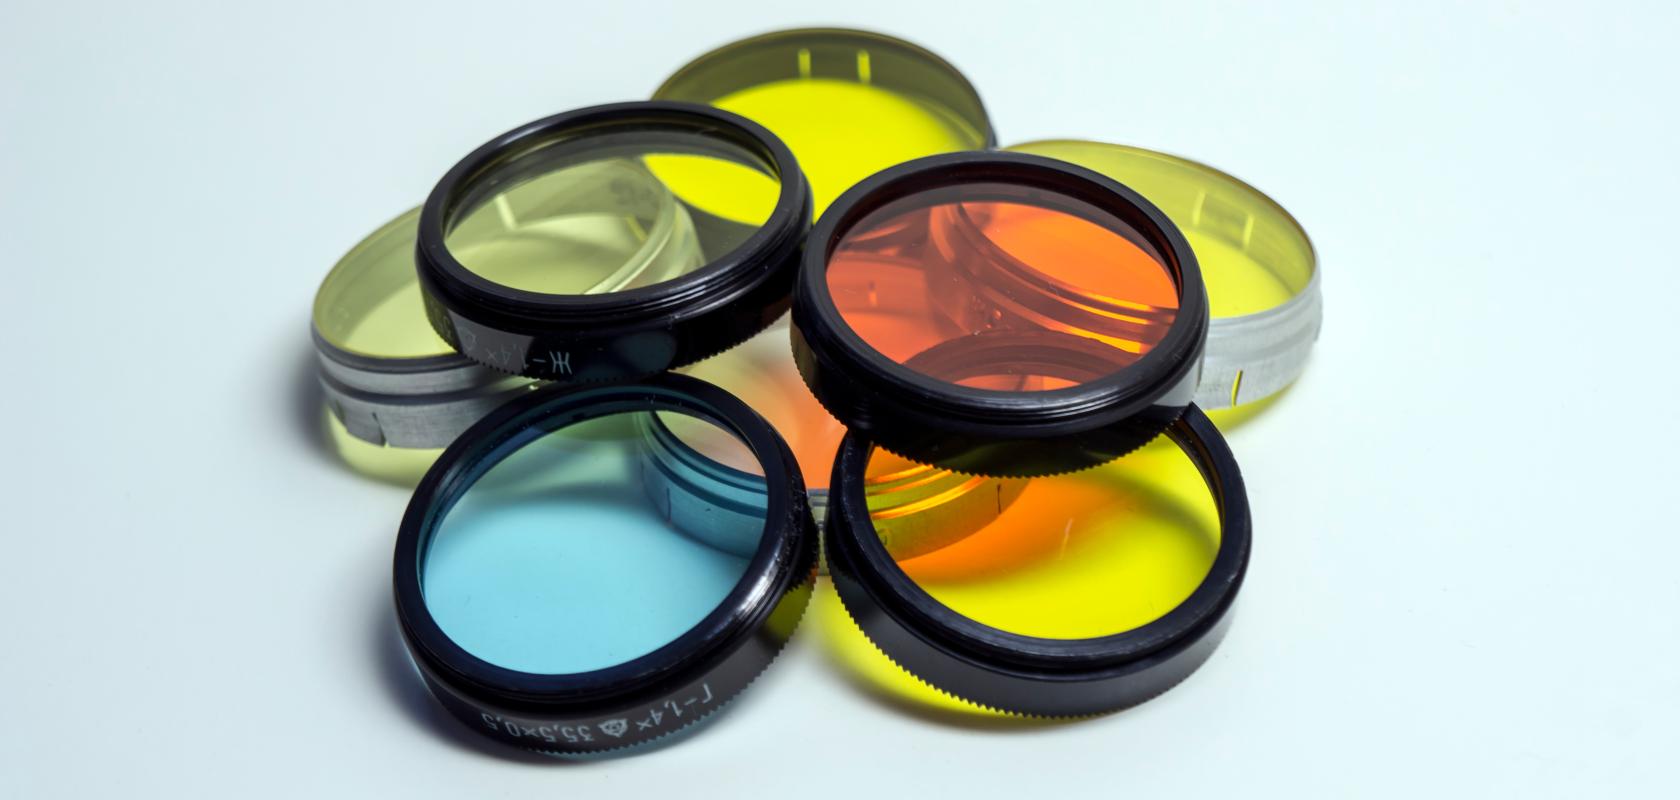 Optical filters are used to selectively transmit or reject light of different wavelengths (Credit: Vladimir_Dresvyannikov/Shutterstock.com)